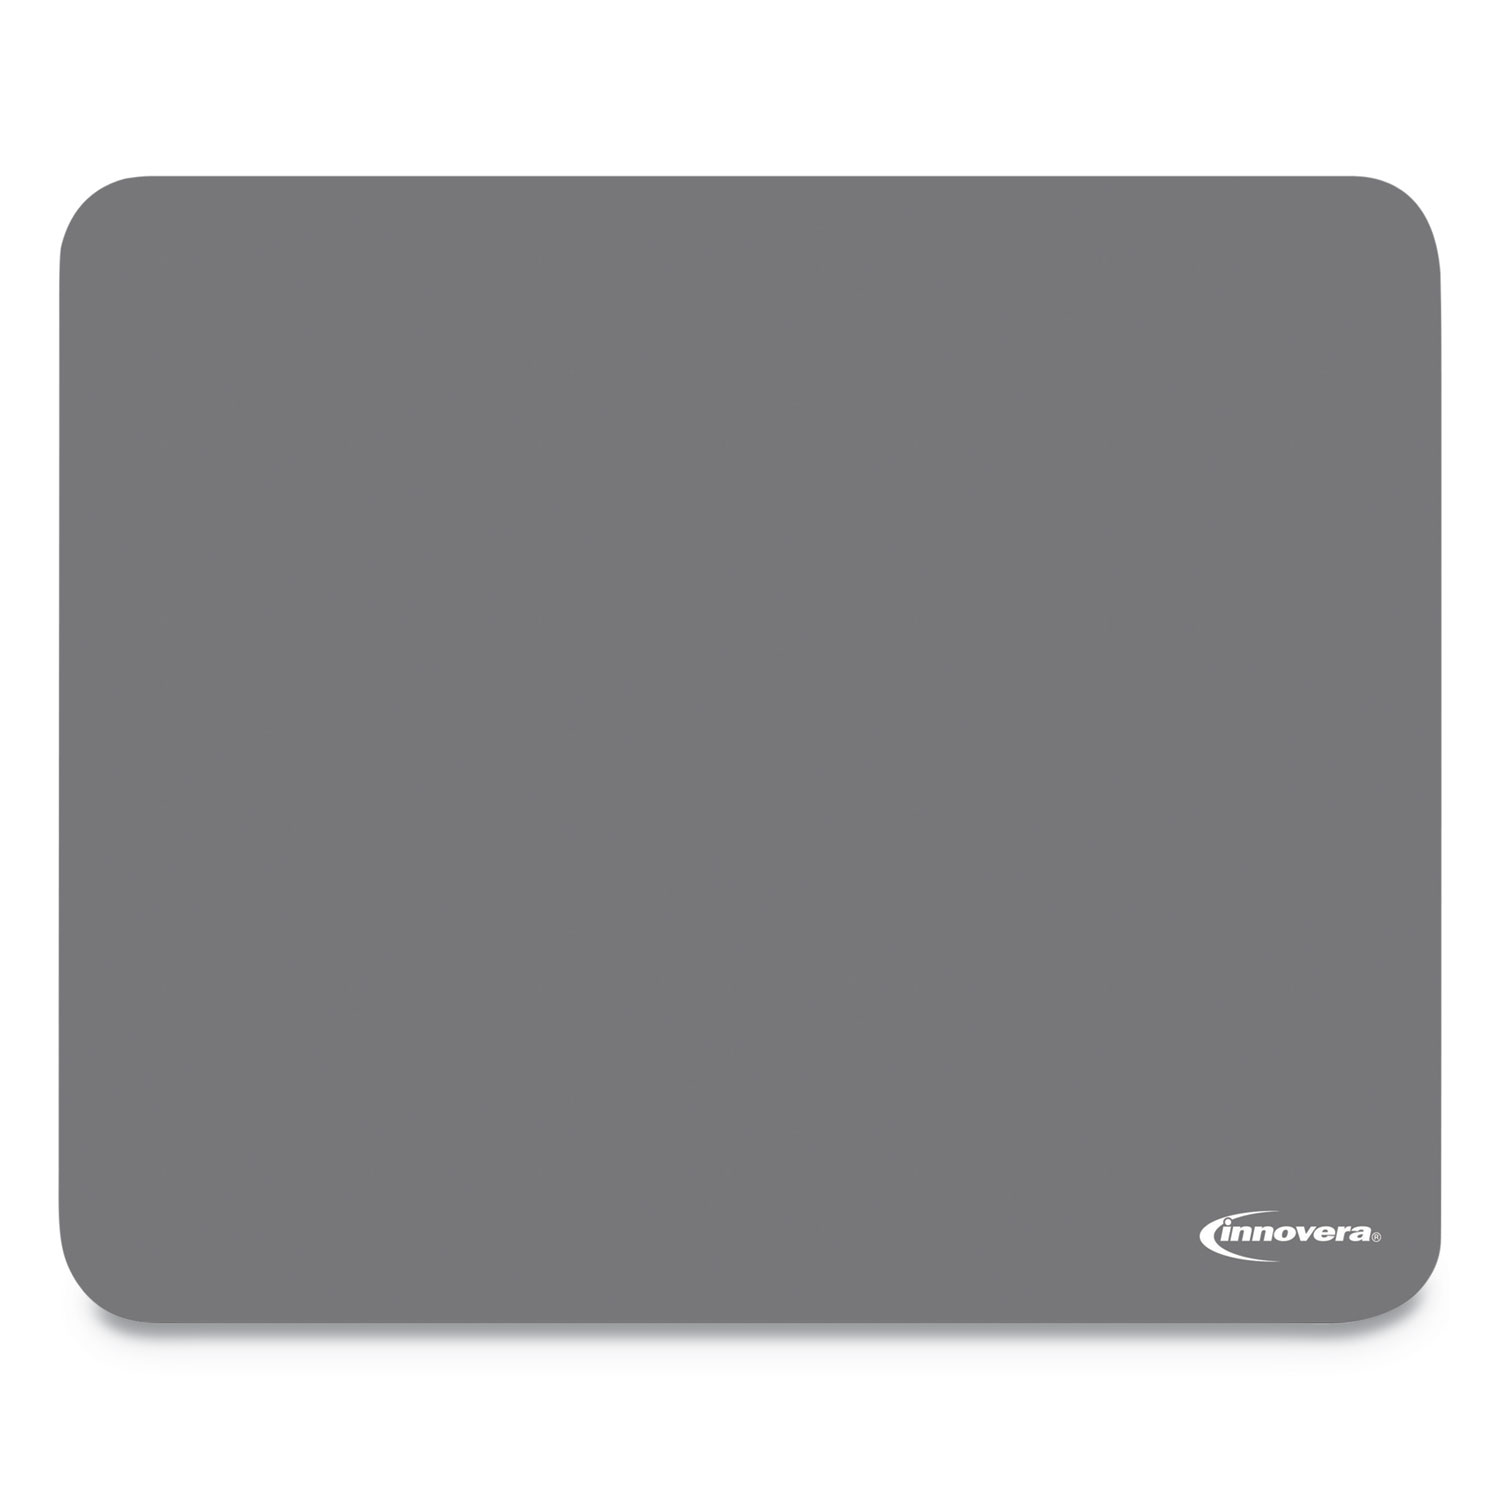  Innovera IVR52449 Latex-Free Mouse Pad, Gray (IVR52449) 